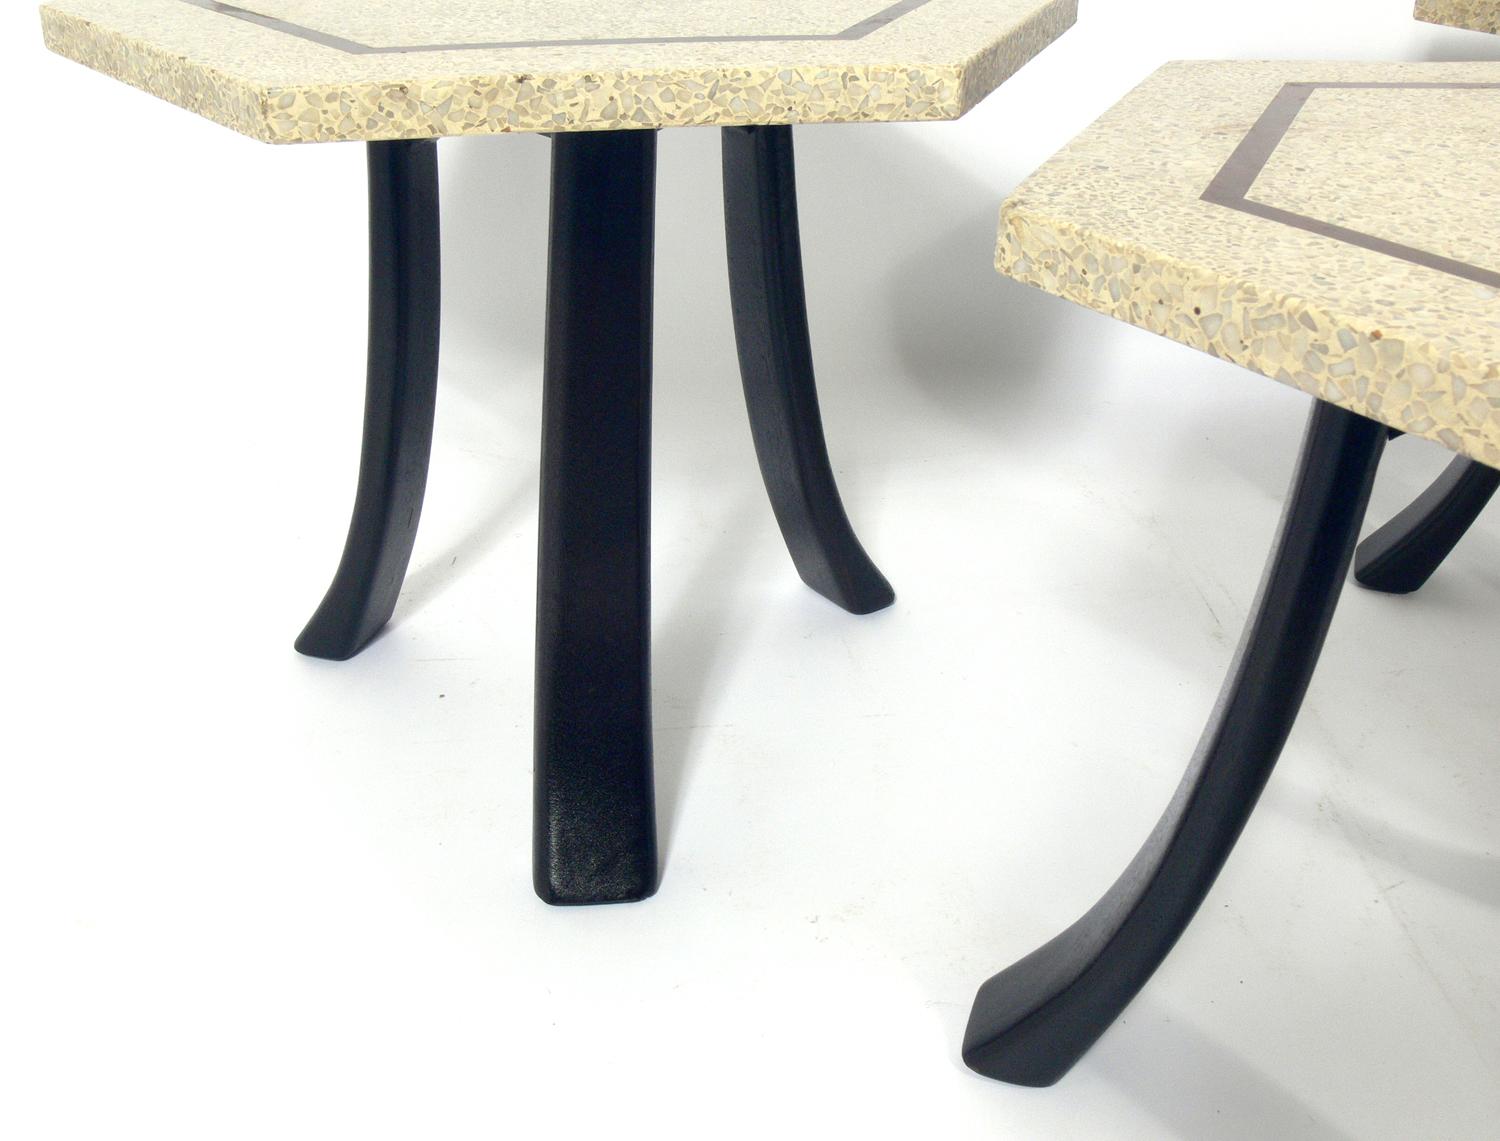 American Selection of Harvey Probber Hex Tables